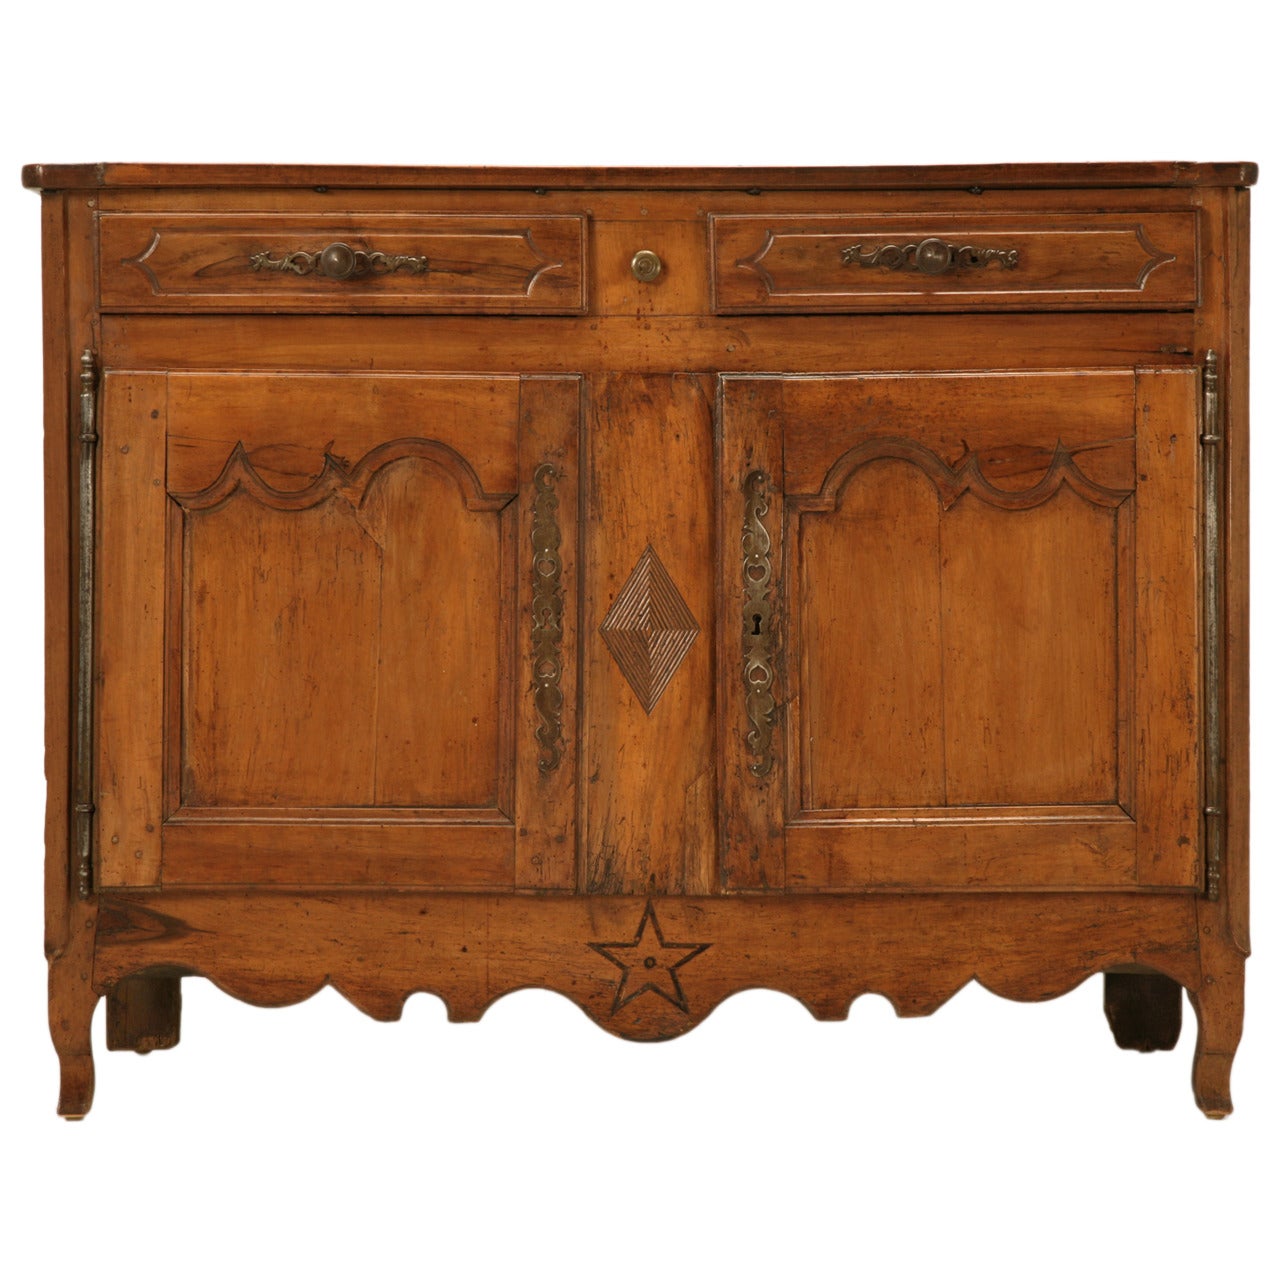 Antique French Antique Buffet with Star and Diamond Motif From Directoire Period